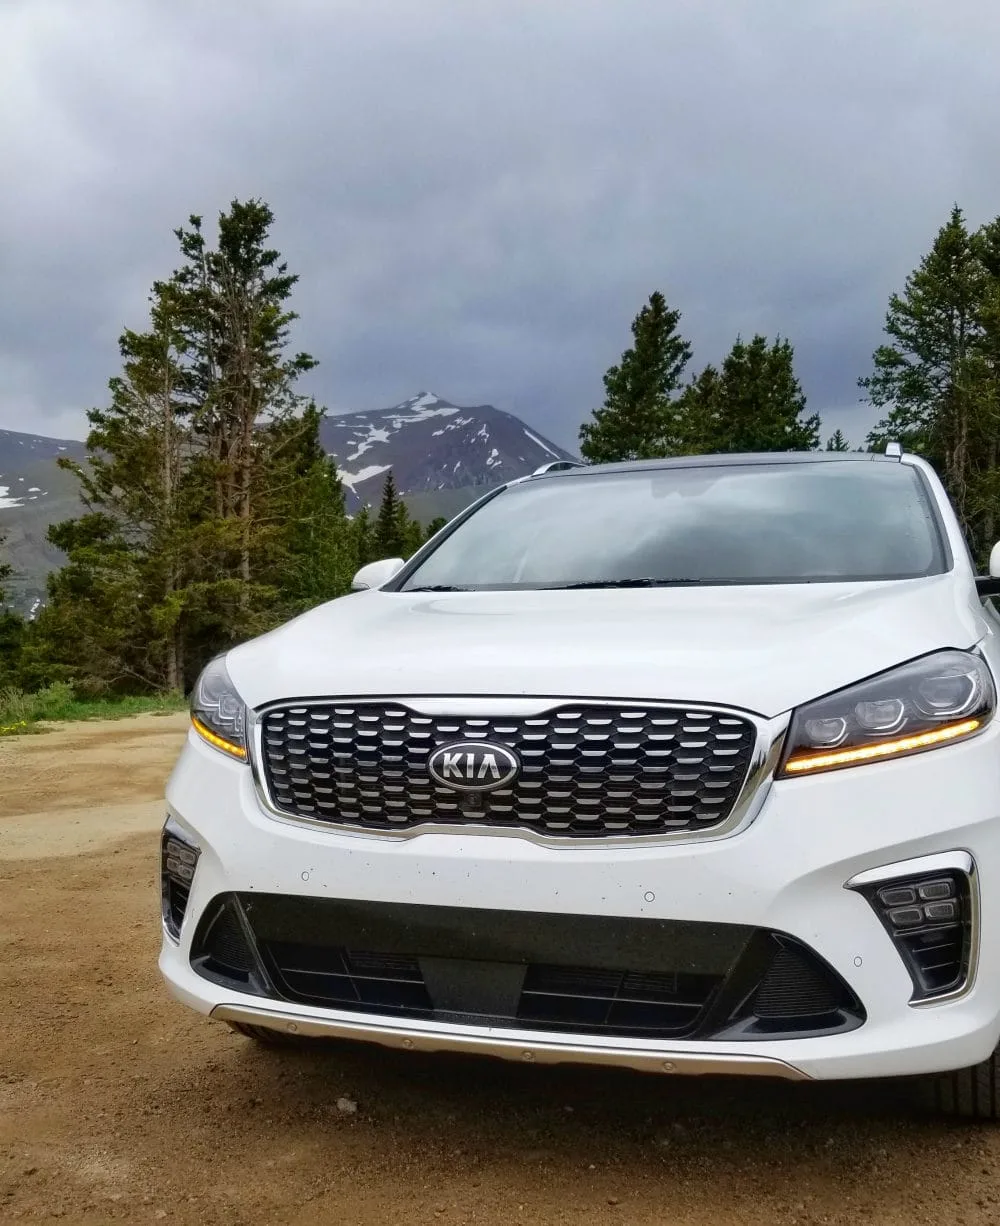 Tackling mountains in the 2019 Kia Sorento. It's the best midsize SUV for the money!